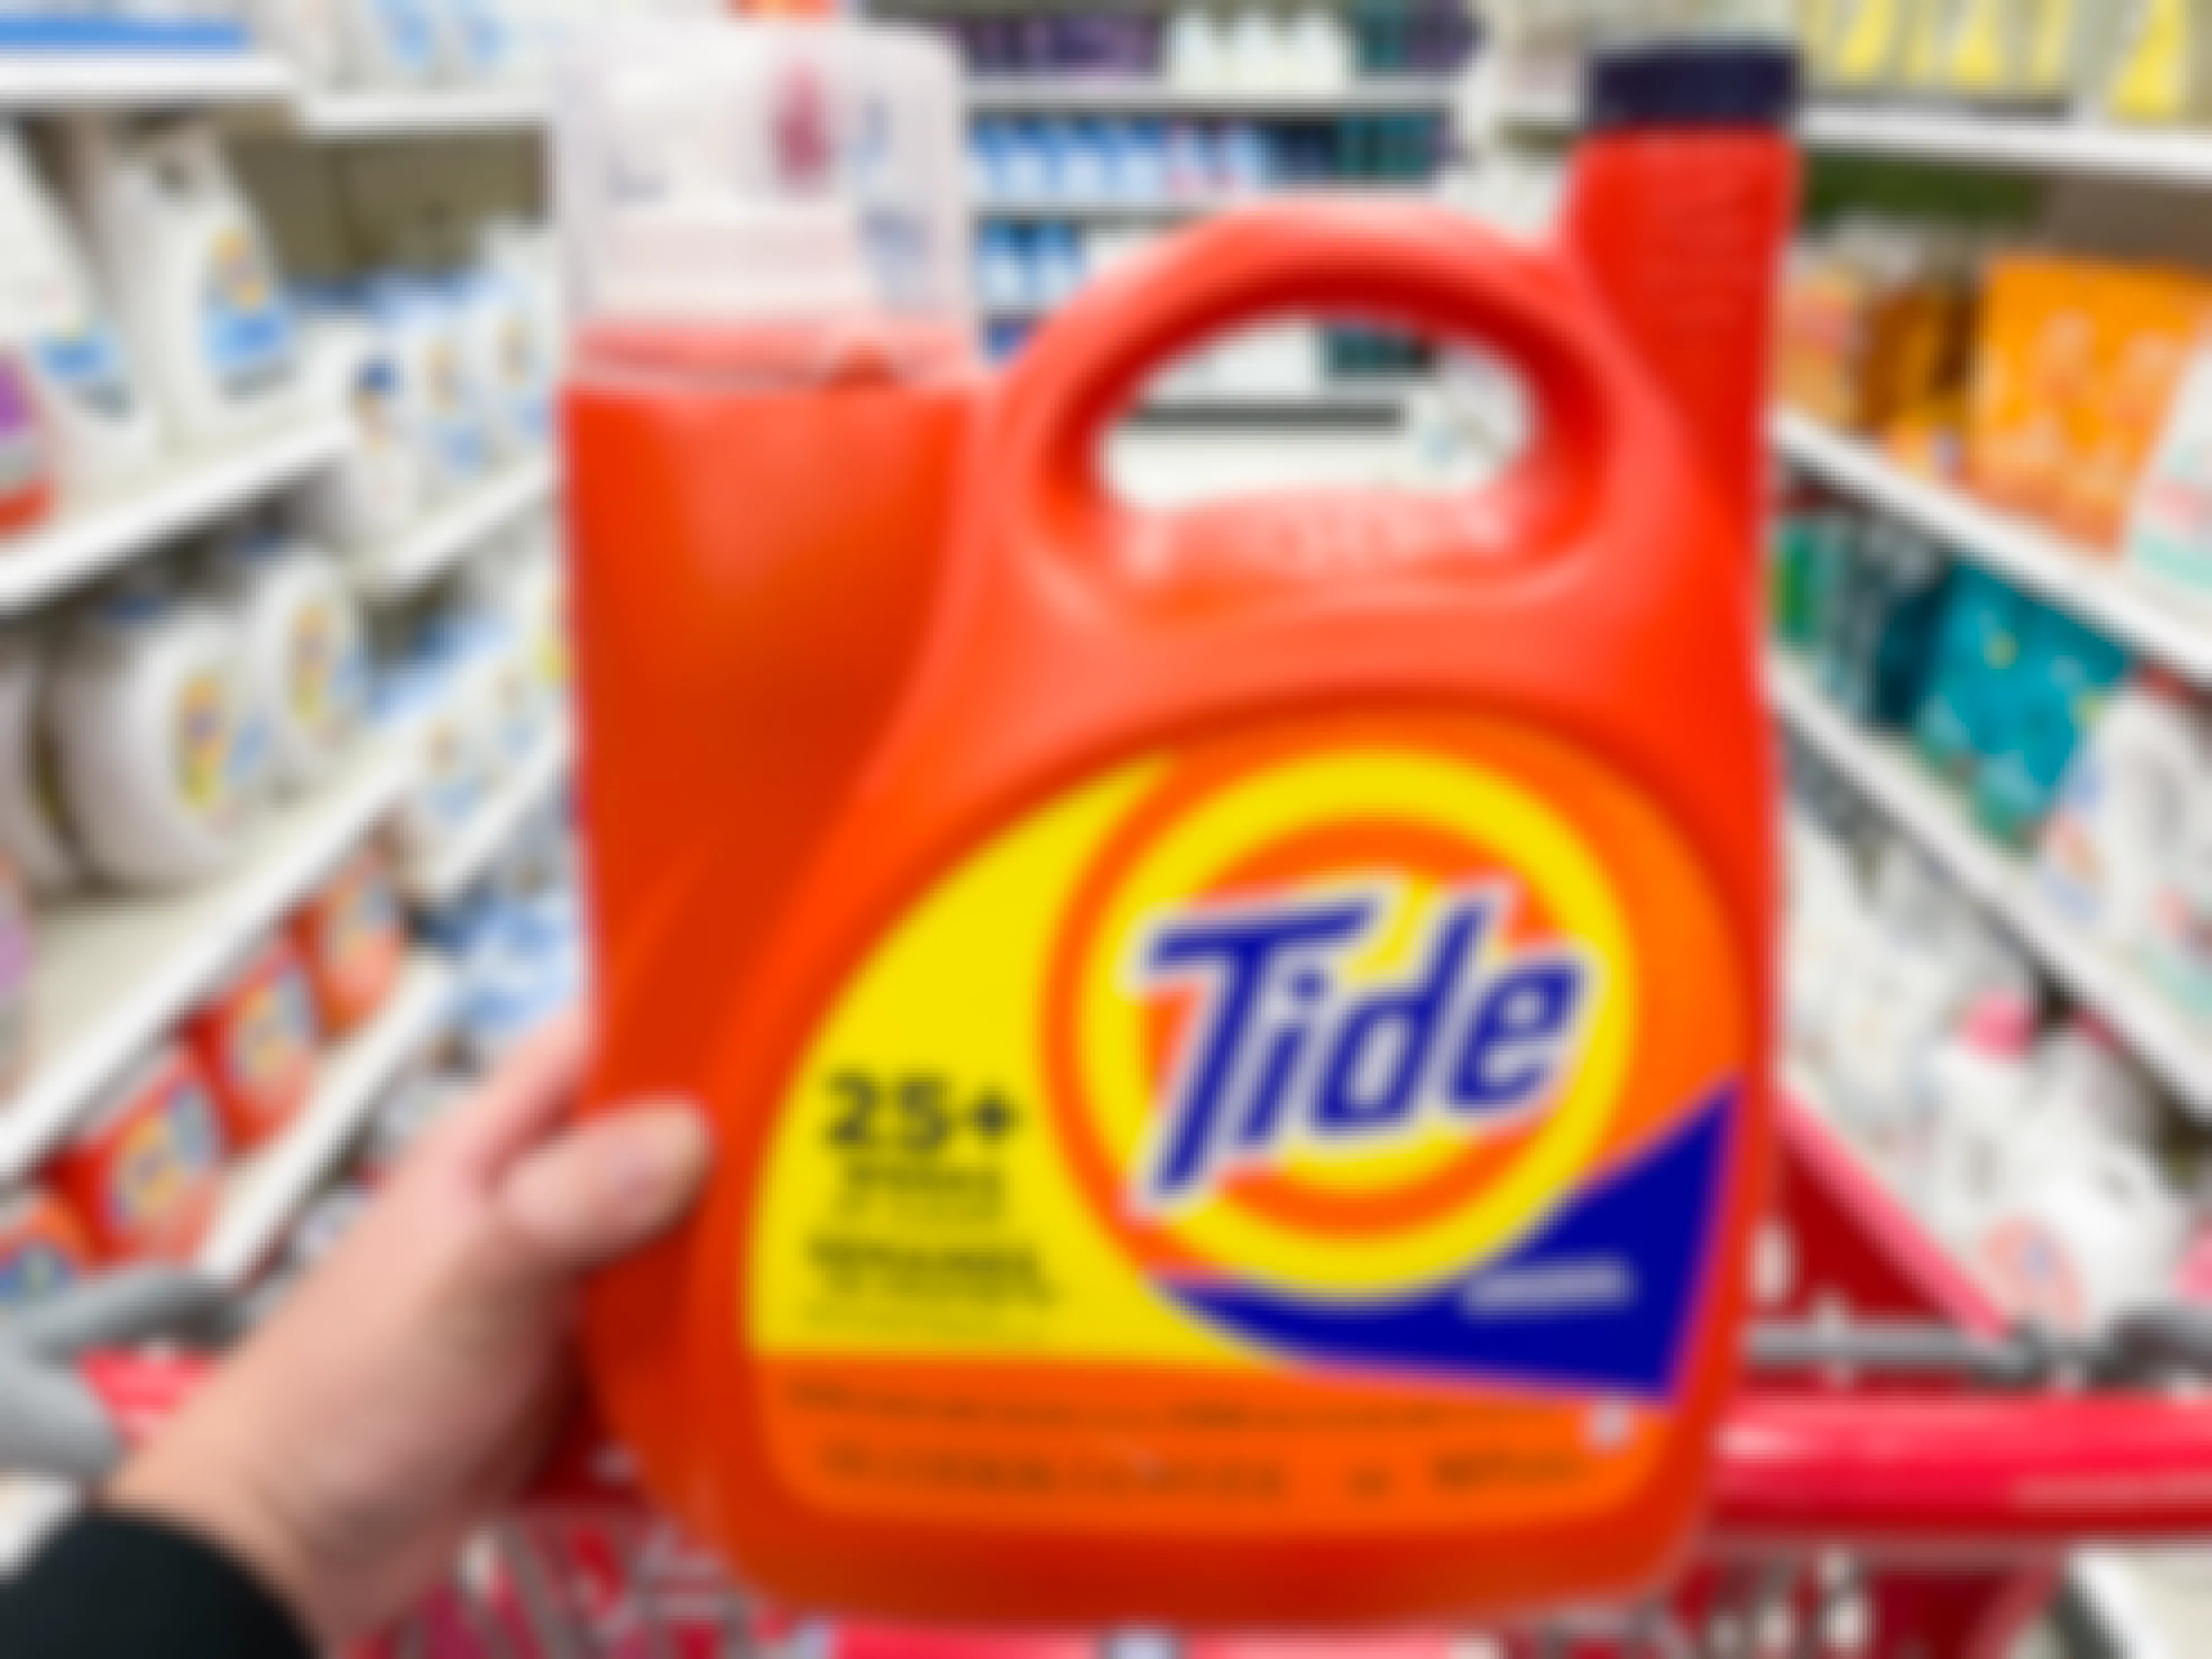 A person's hand resting on the handle of a Target shopping cart holding up a 1.2 gallon container of Tide Original laundry detergent.